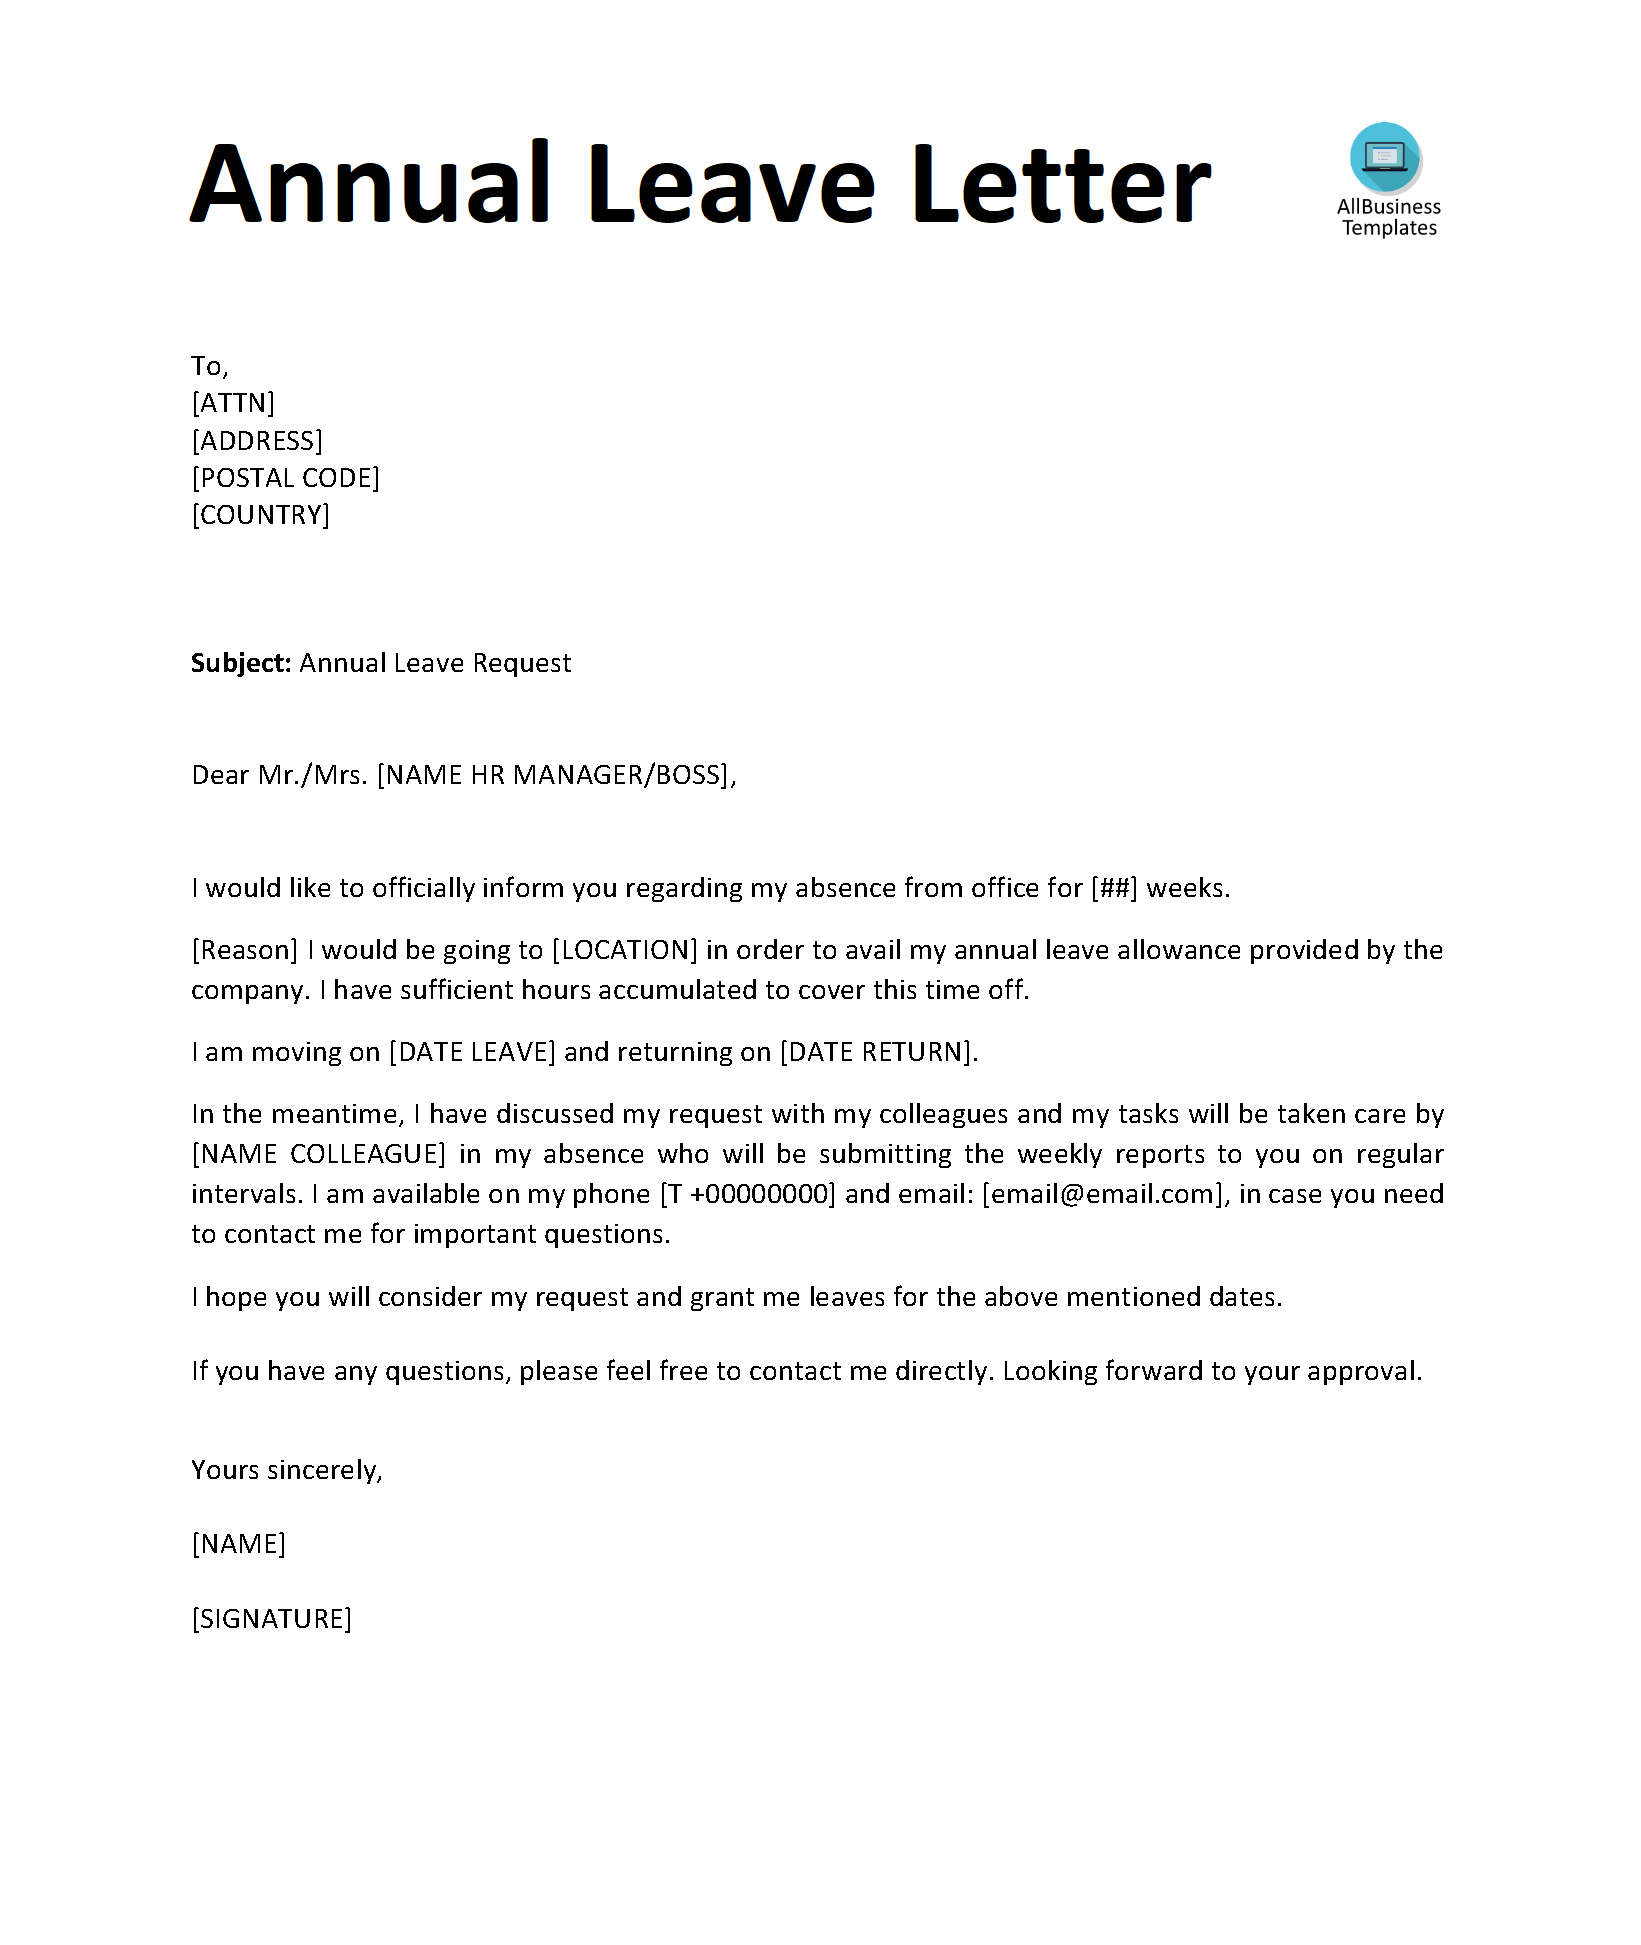 Annual Leave Letter main image